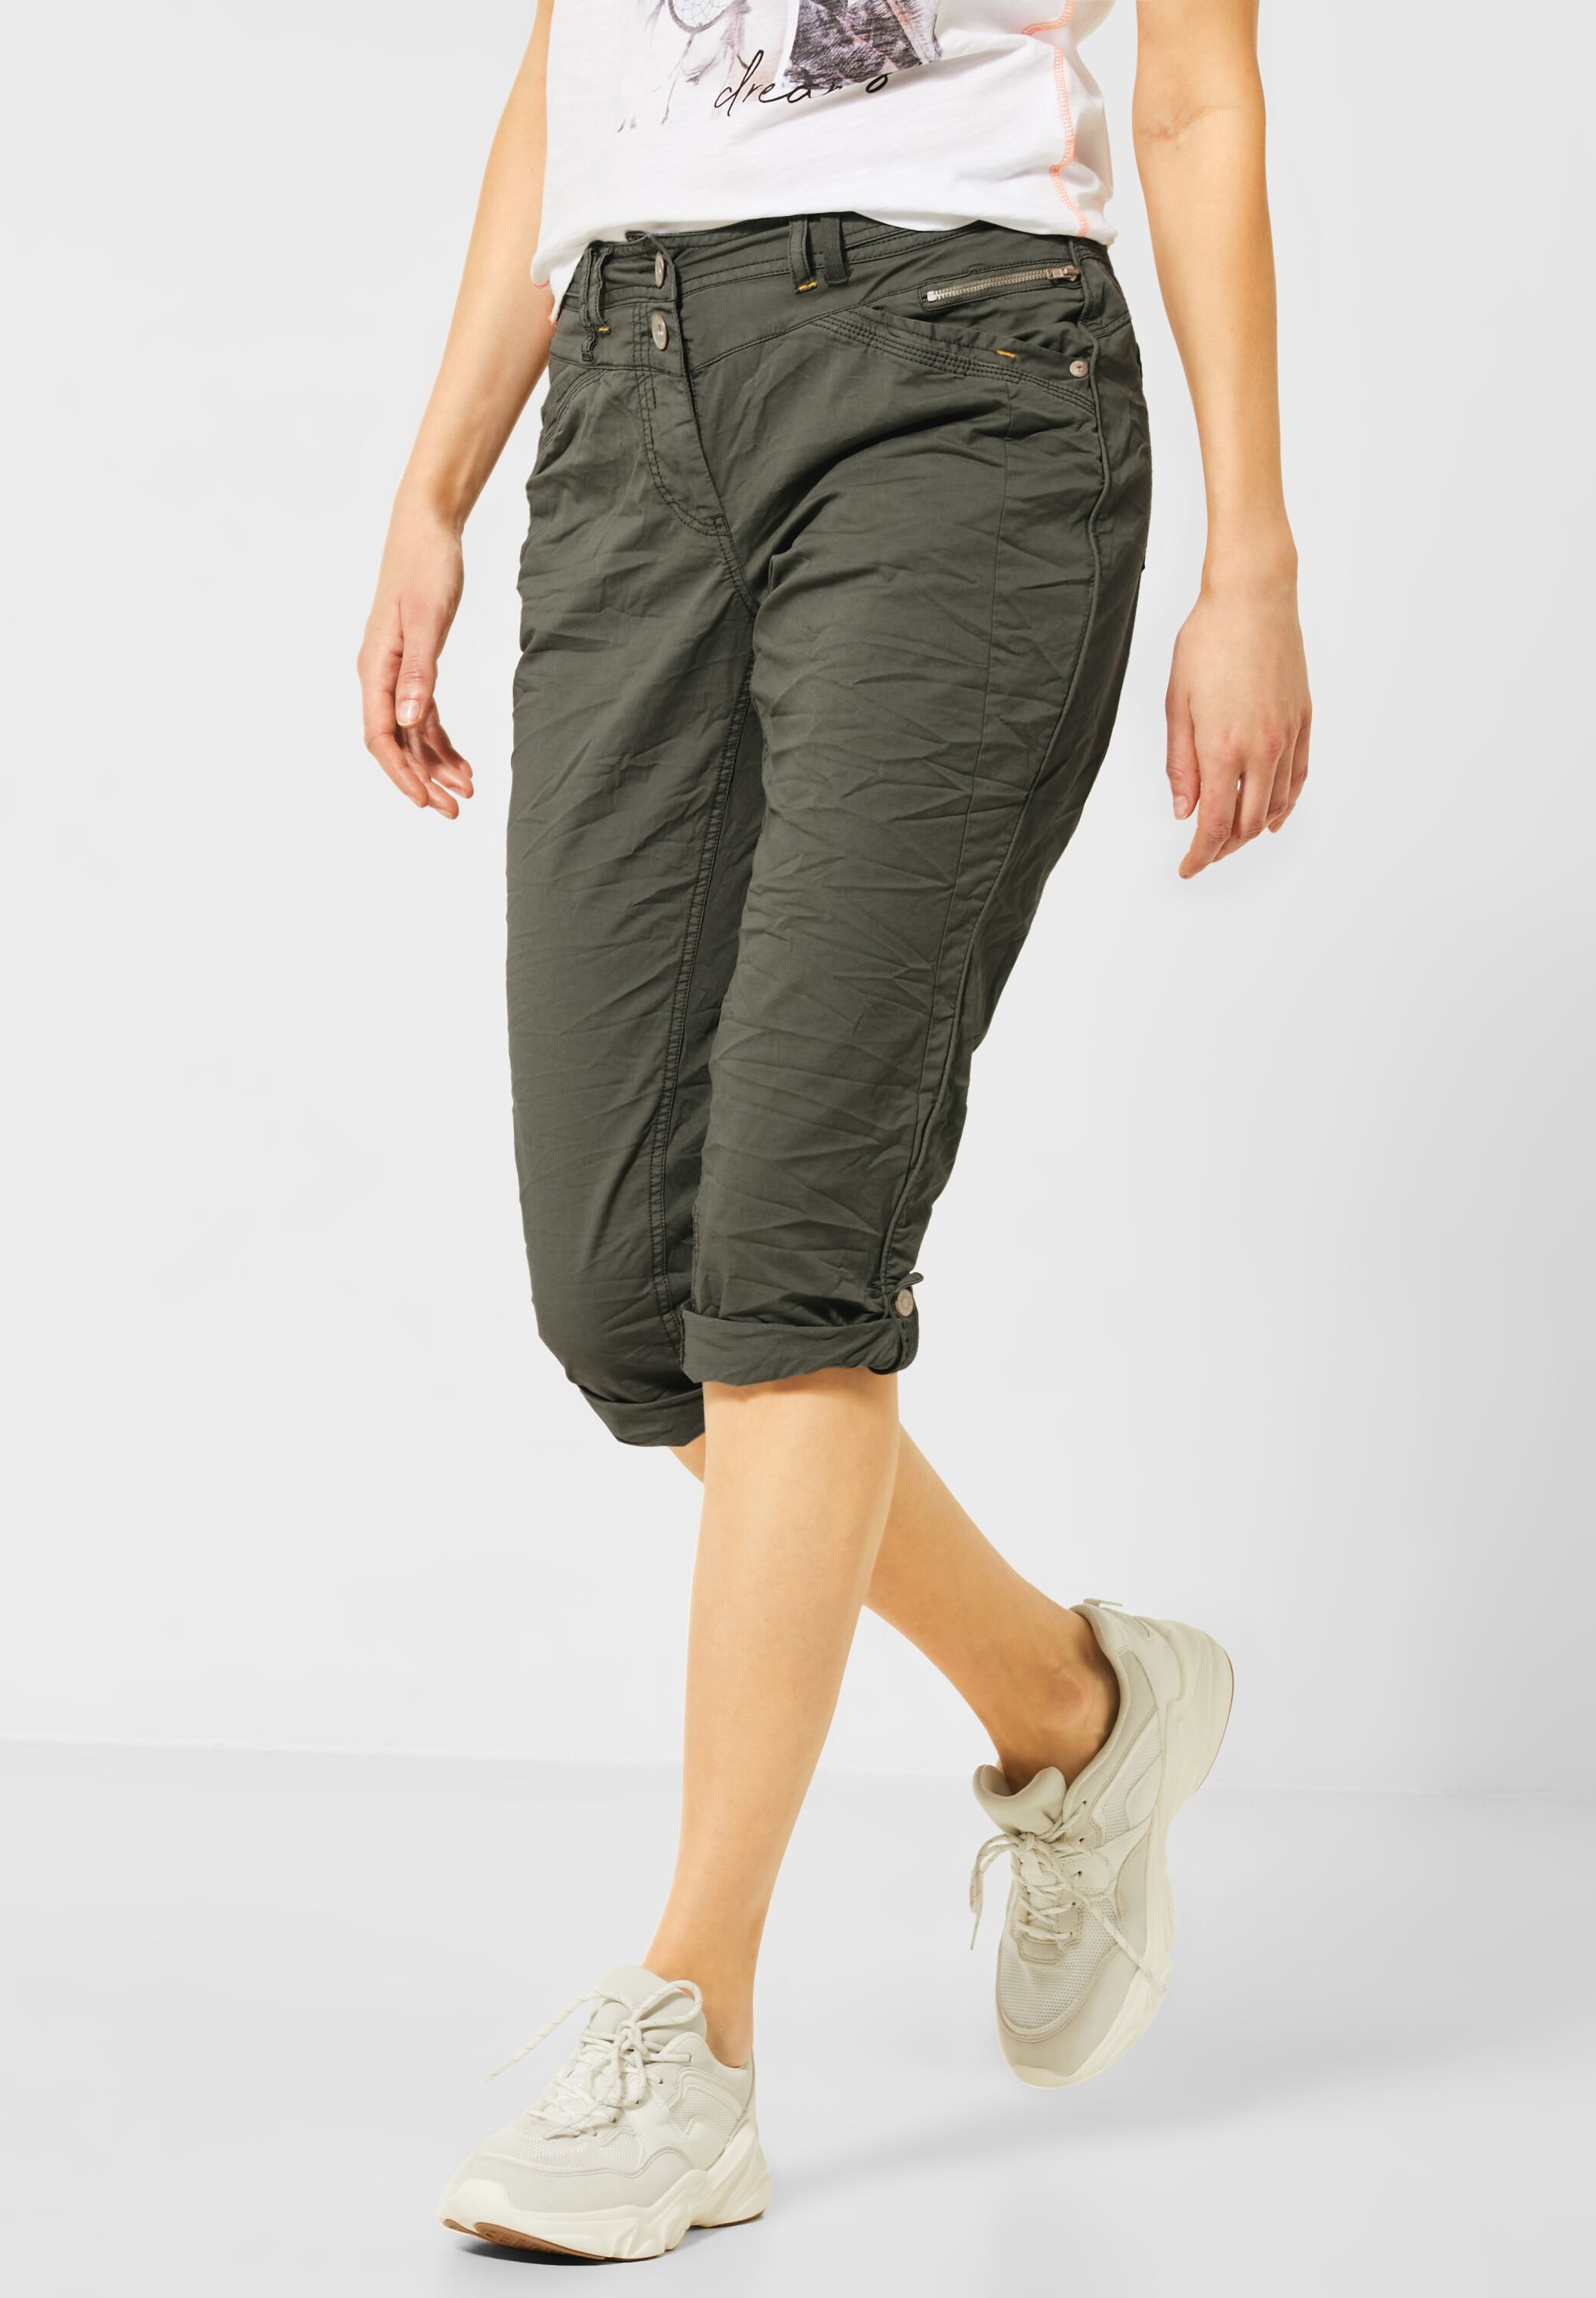 CECIL 3/4 Hose New Simply Mode York in CONCEPT B373013-12173 Khaki 